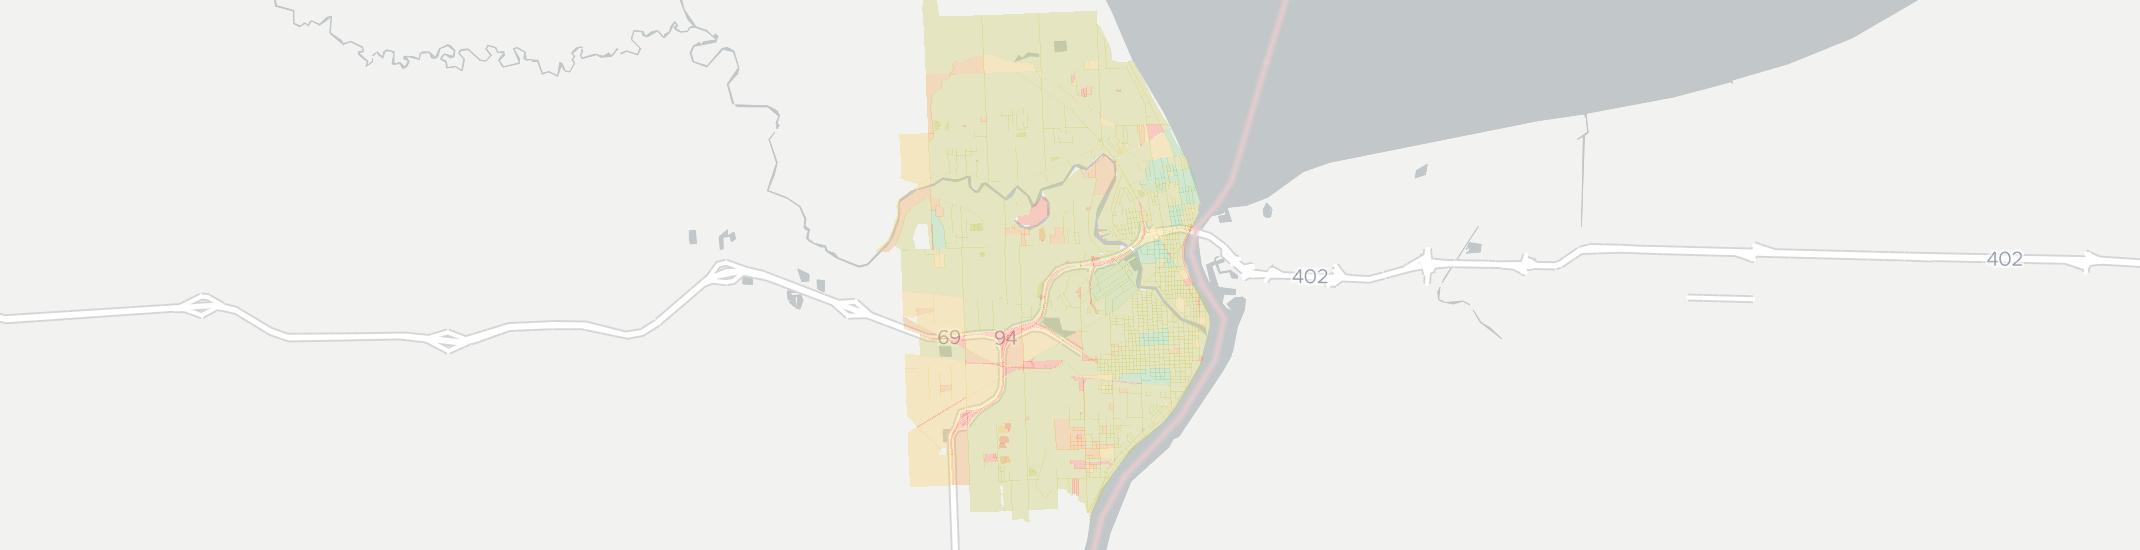 Port Huron Internet Competition Map. Click for interactive map.